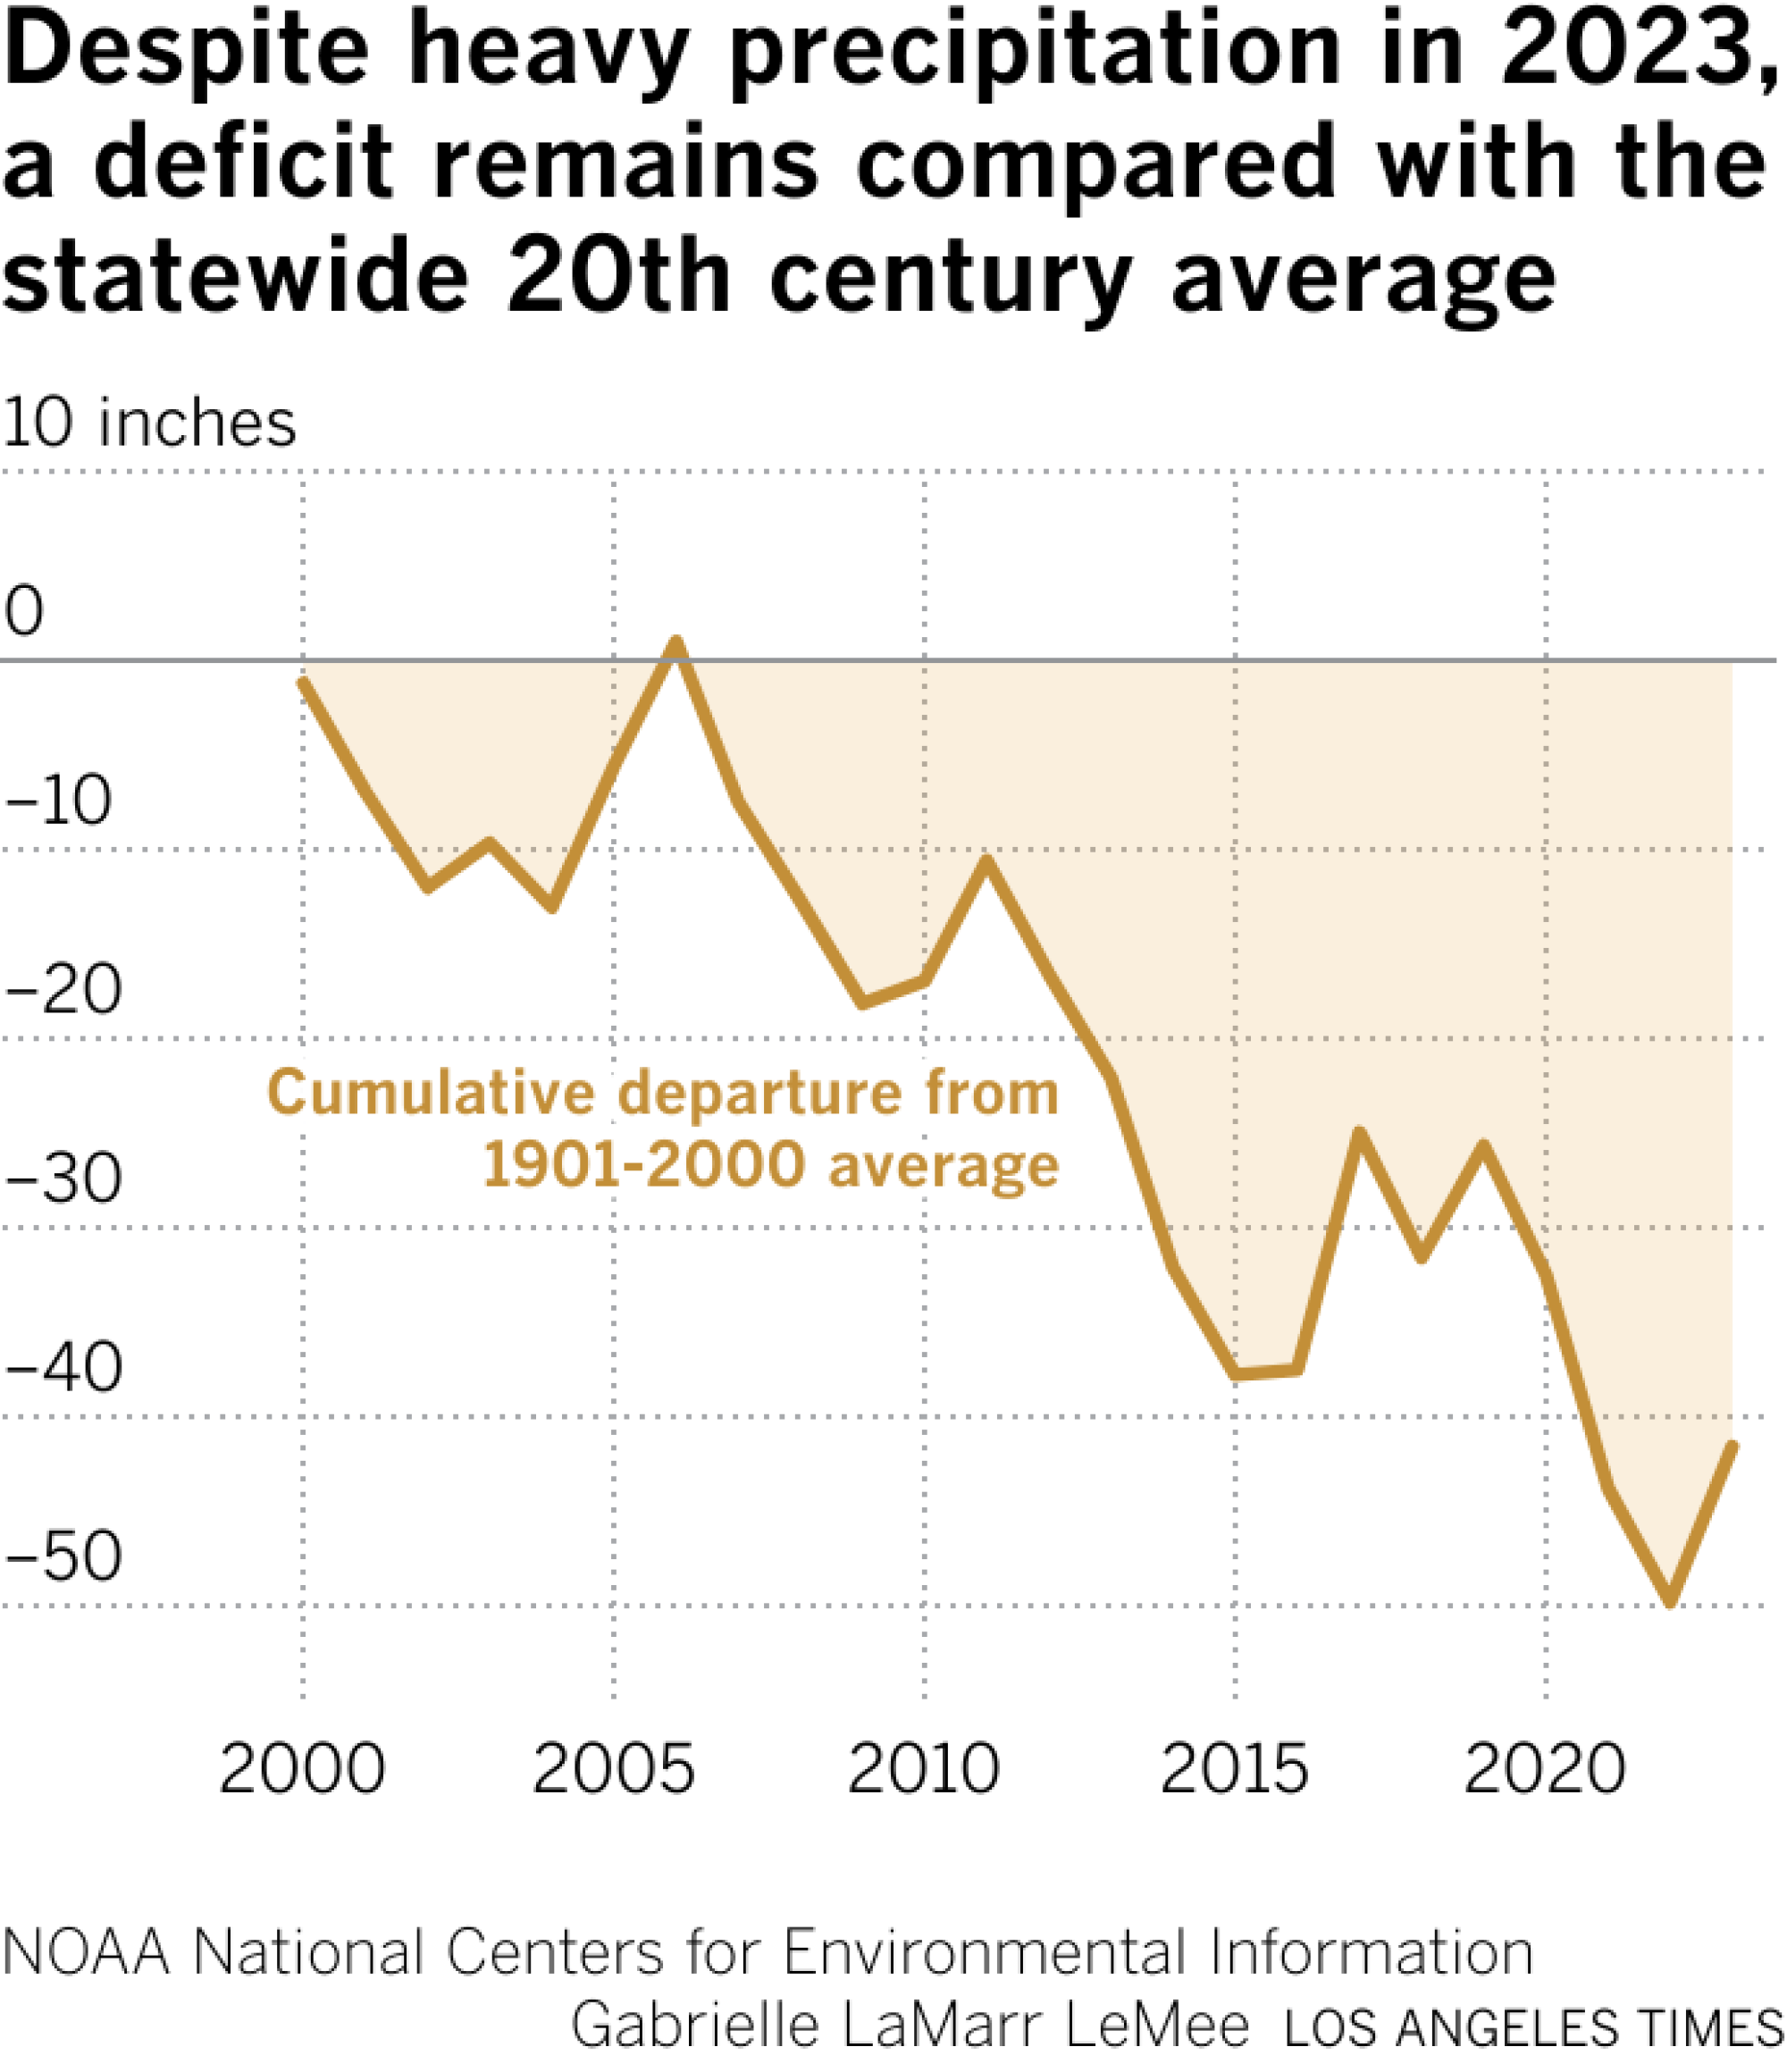 Despite heavy precipitation in 2023, a deficit remains compared with the statewide 20th century average